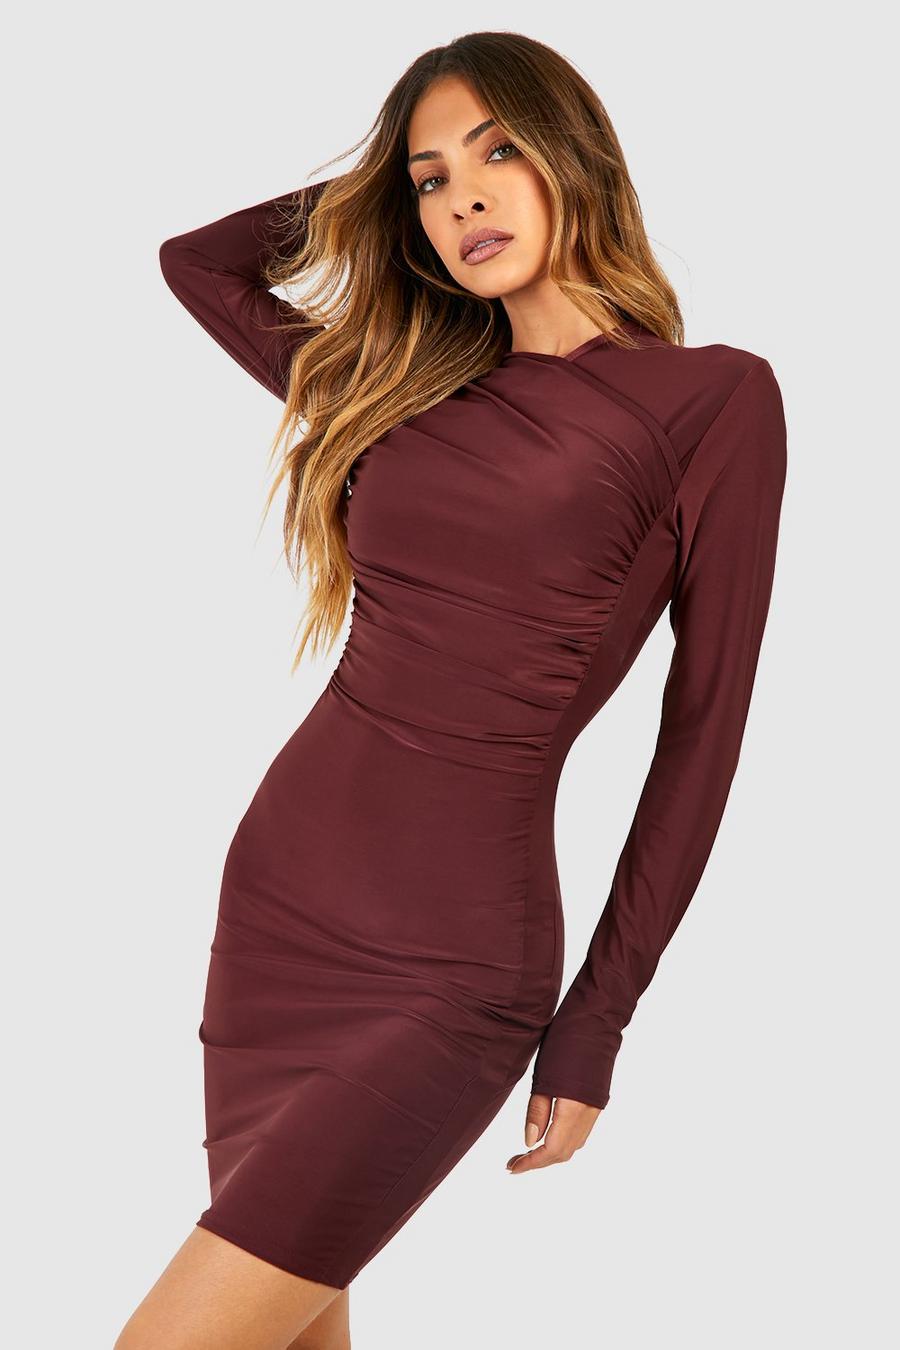 Chocolate brown Matte Slinky Rouched Asymmetric Mini Dress